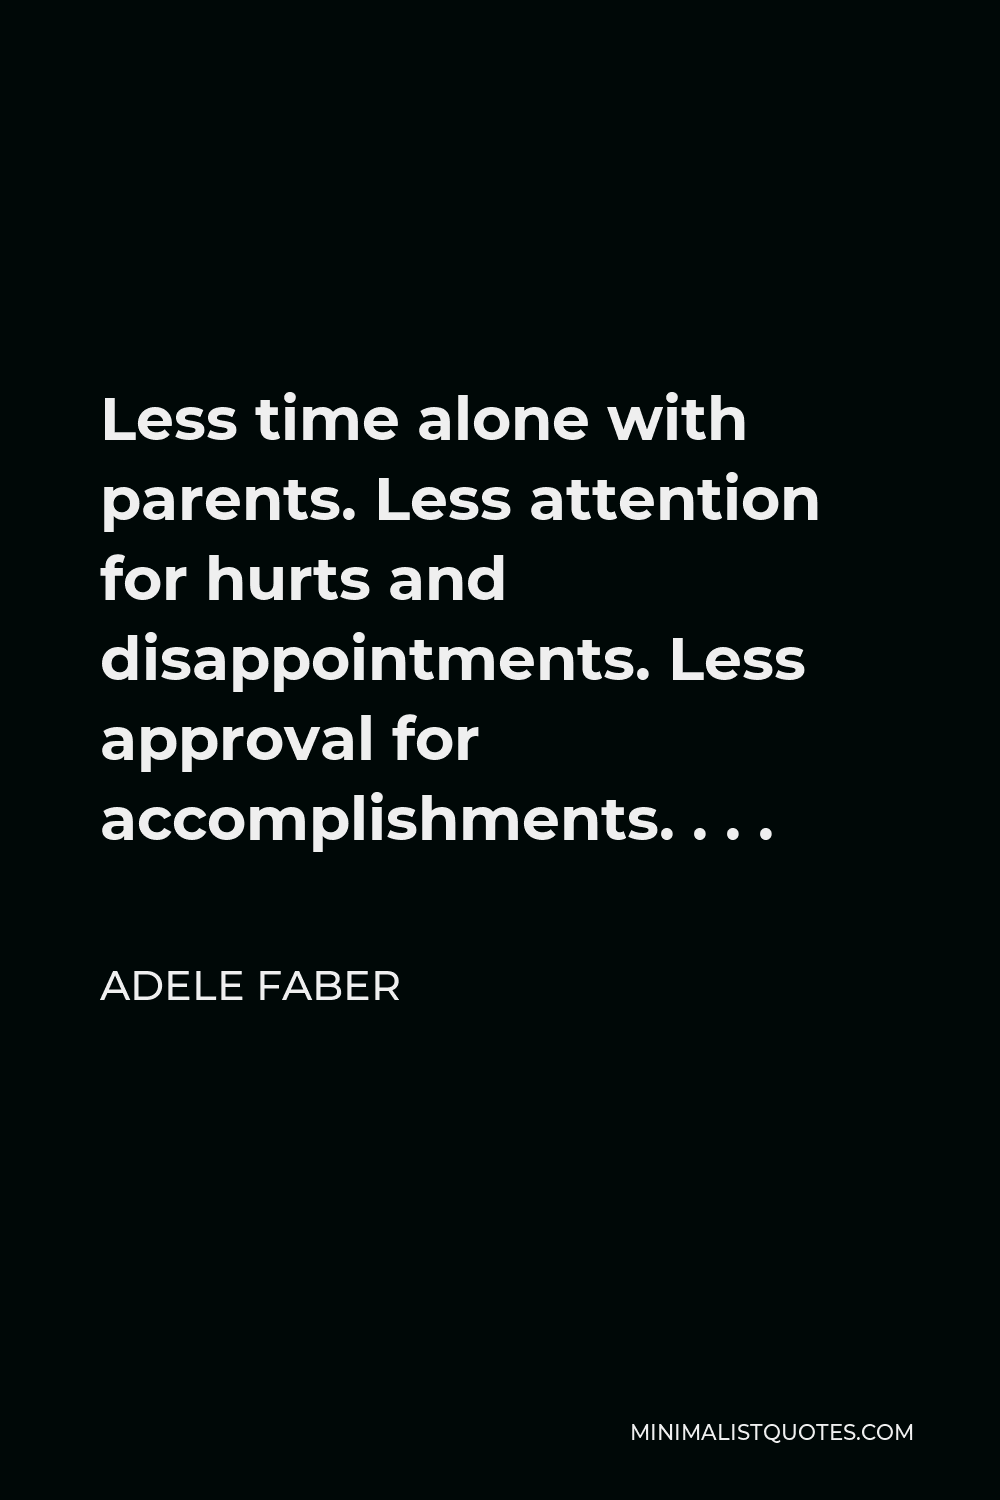 Adele Faber Quote - Less time alone with parents. Less attention for hurts and disappointments. Less approval for accomplishments. . . .